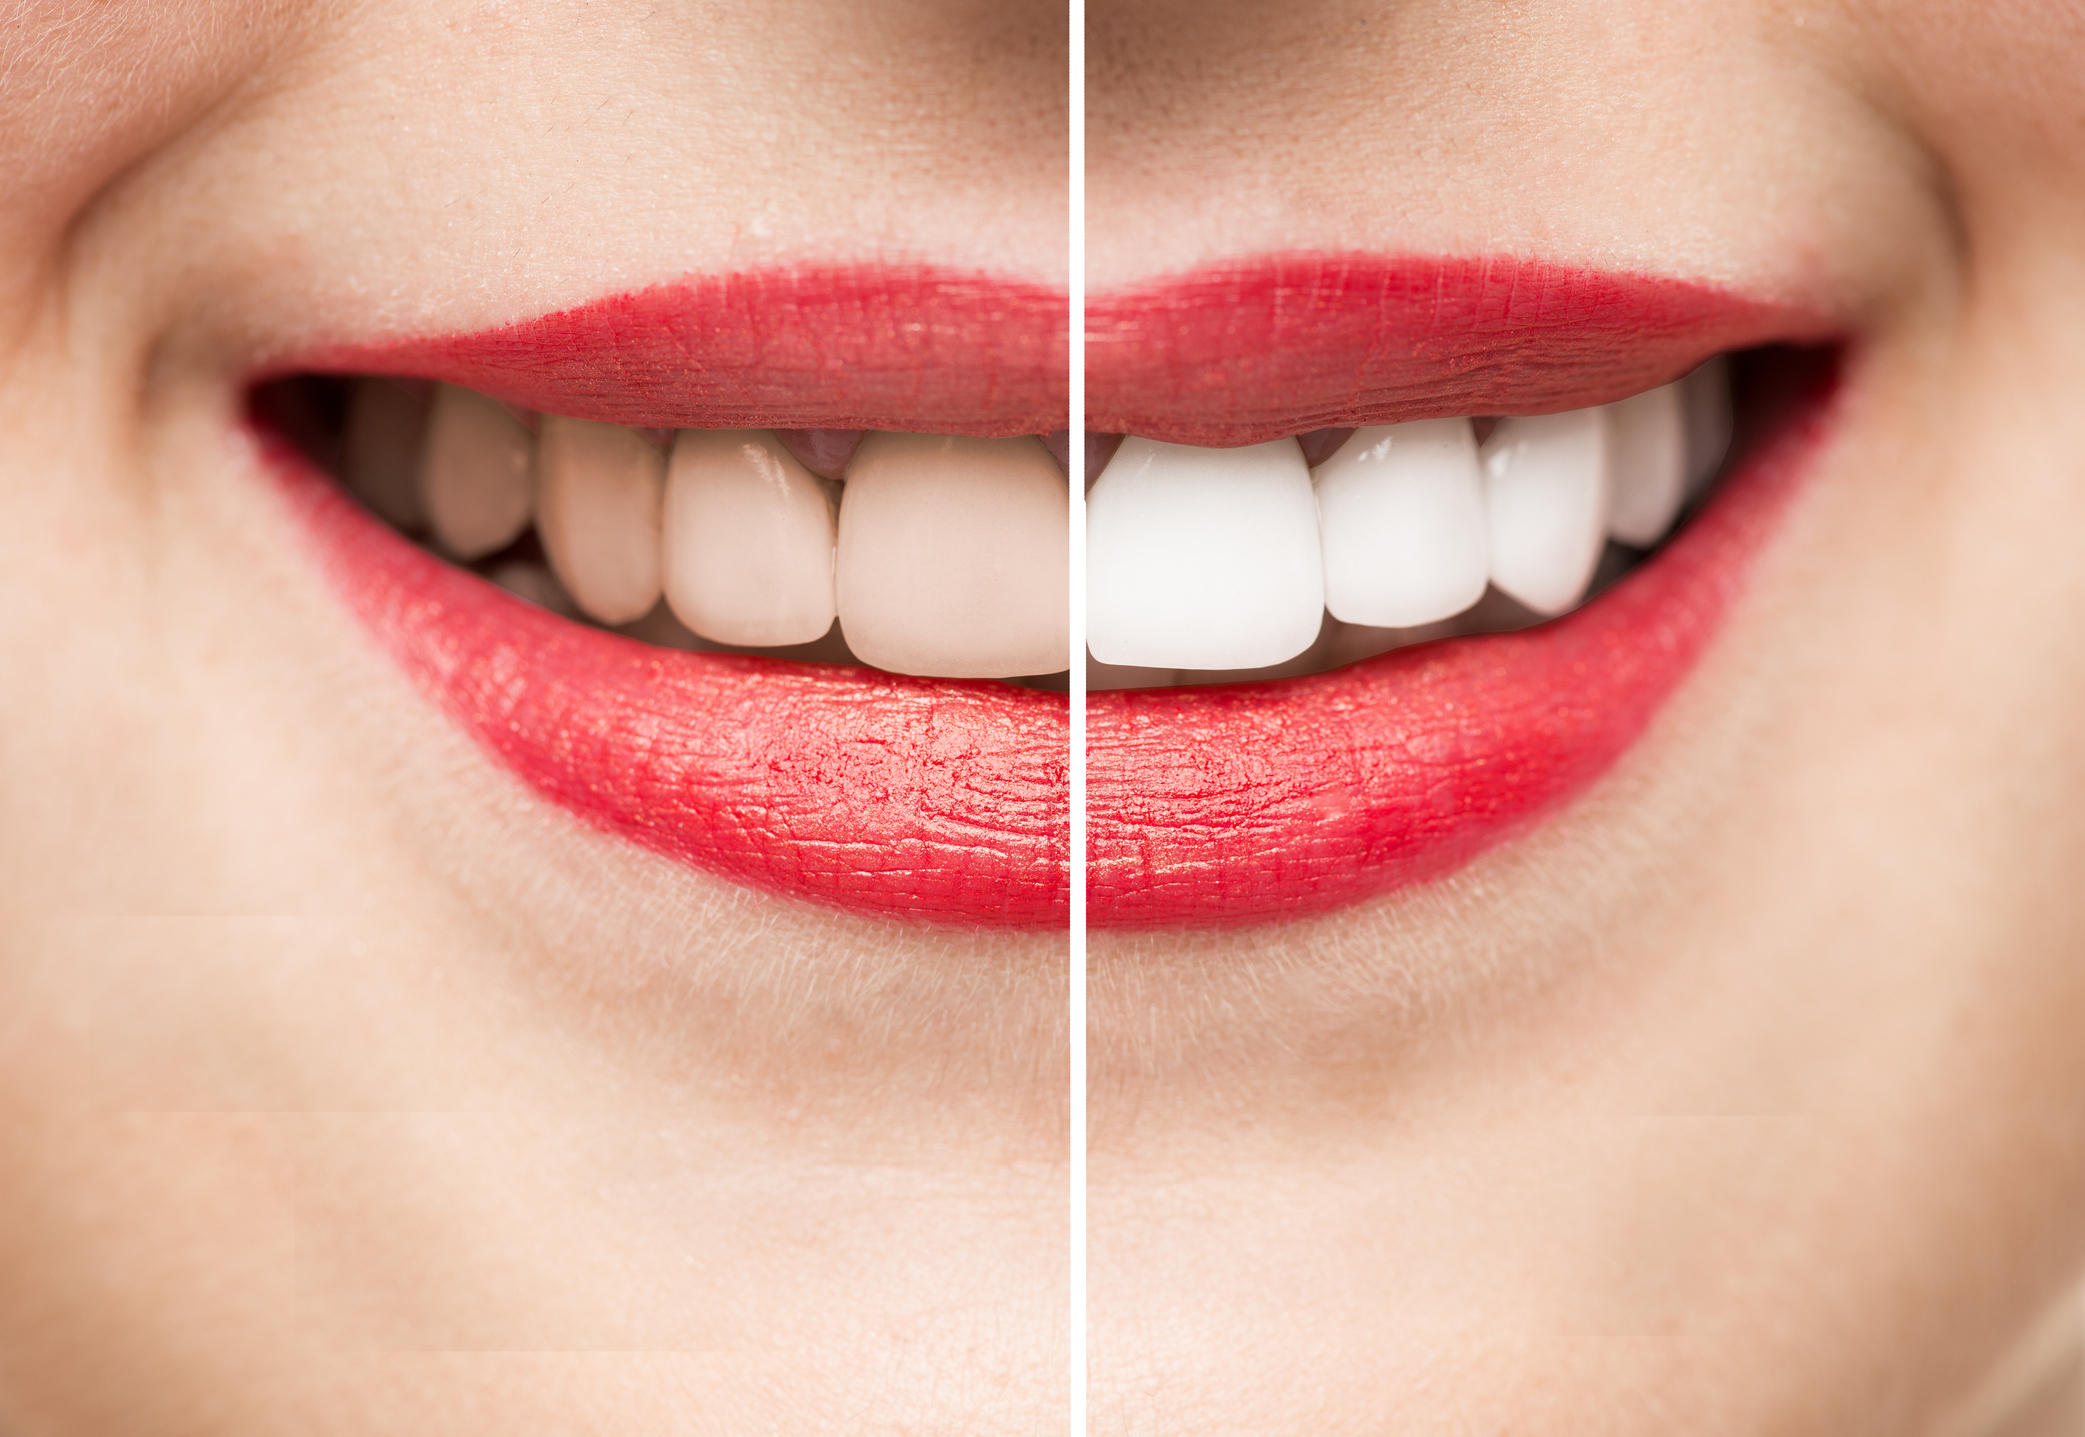 Extreme Makeover — For Your Mouth! Our “Smile Makeovers” Are A Transformational Cosmetic Dentistry Treatment